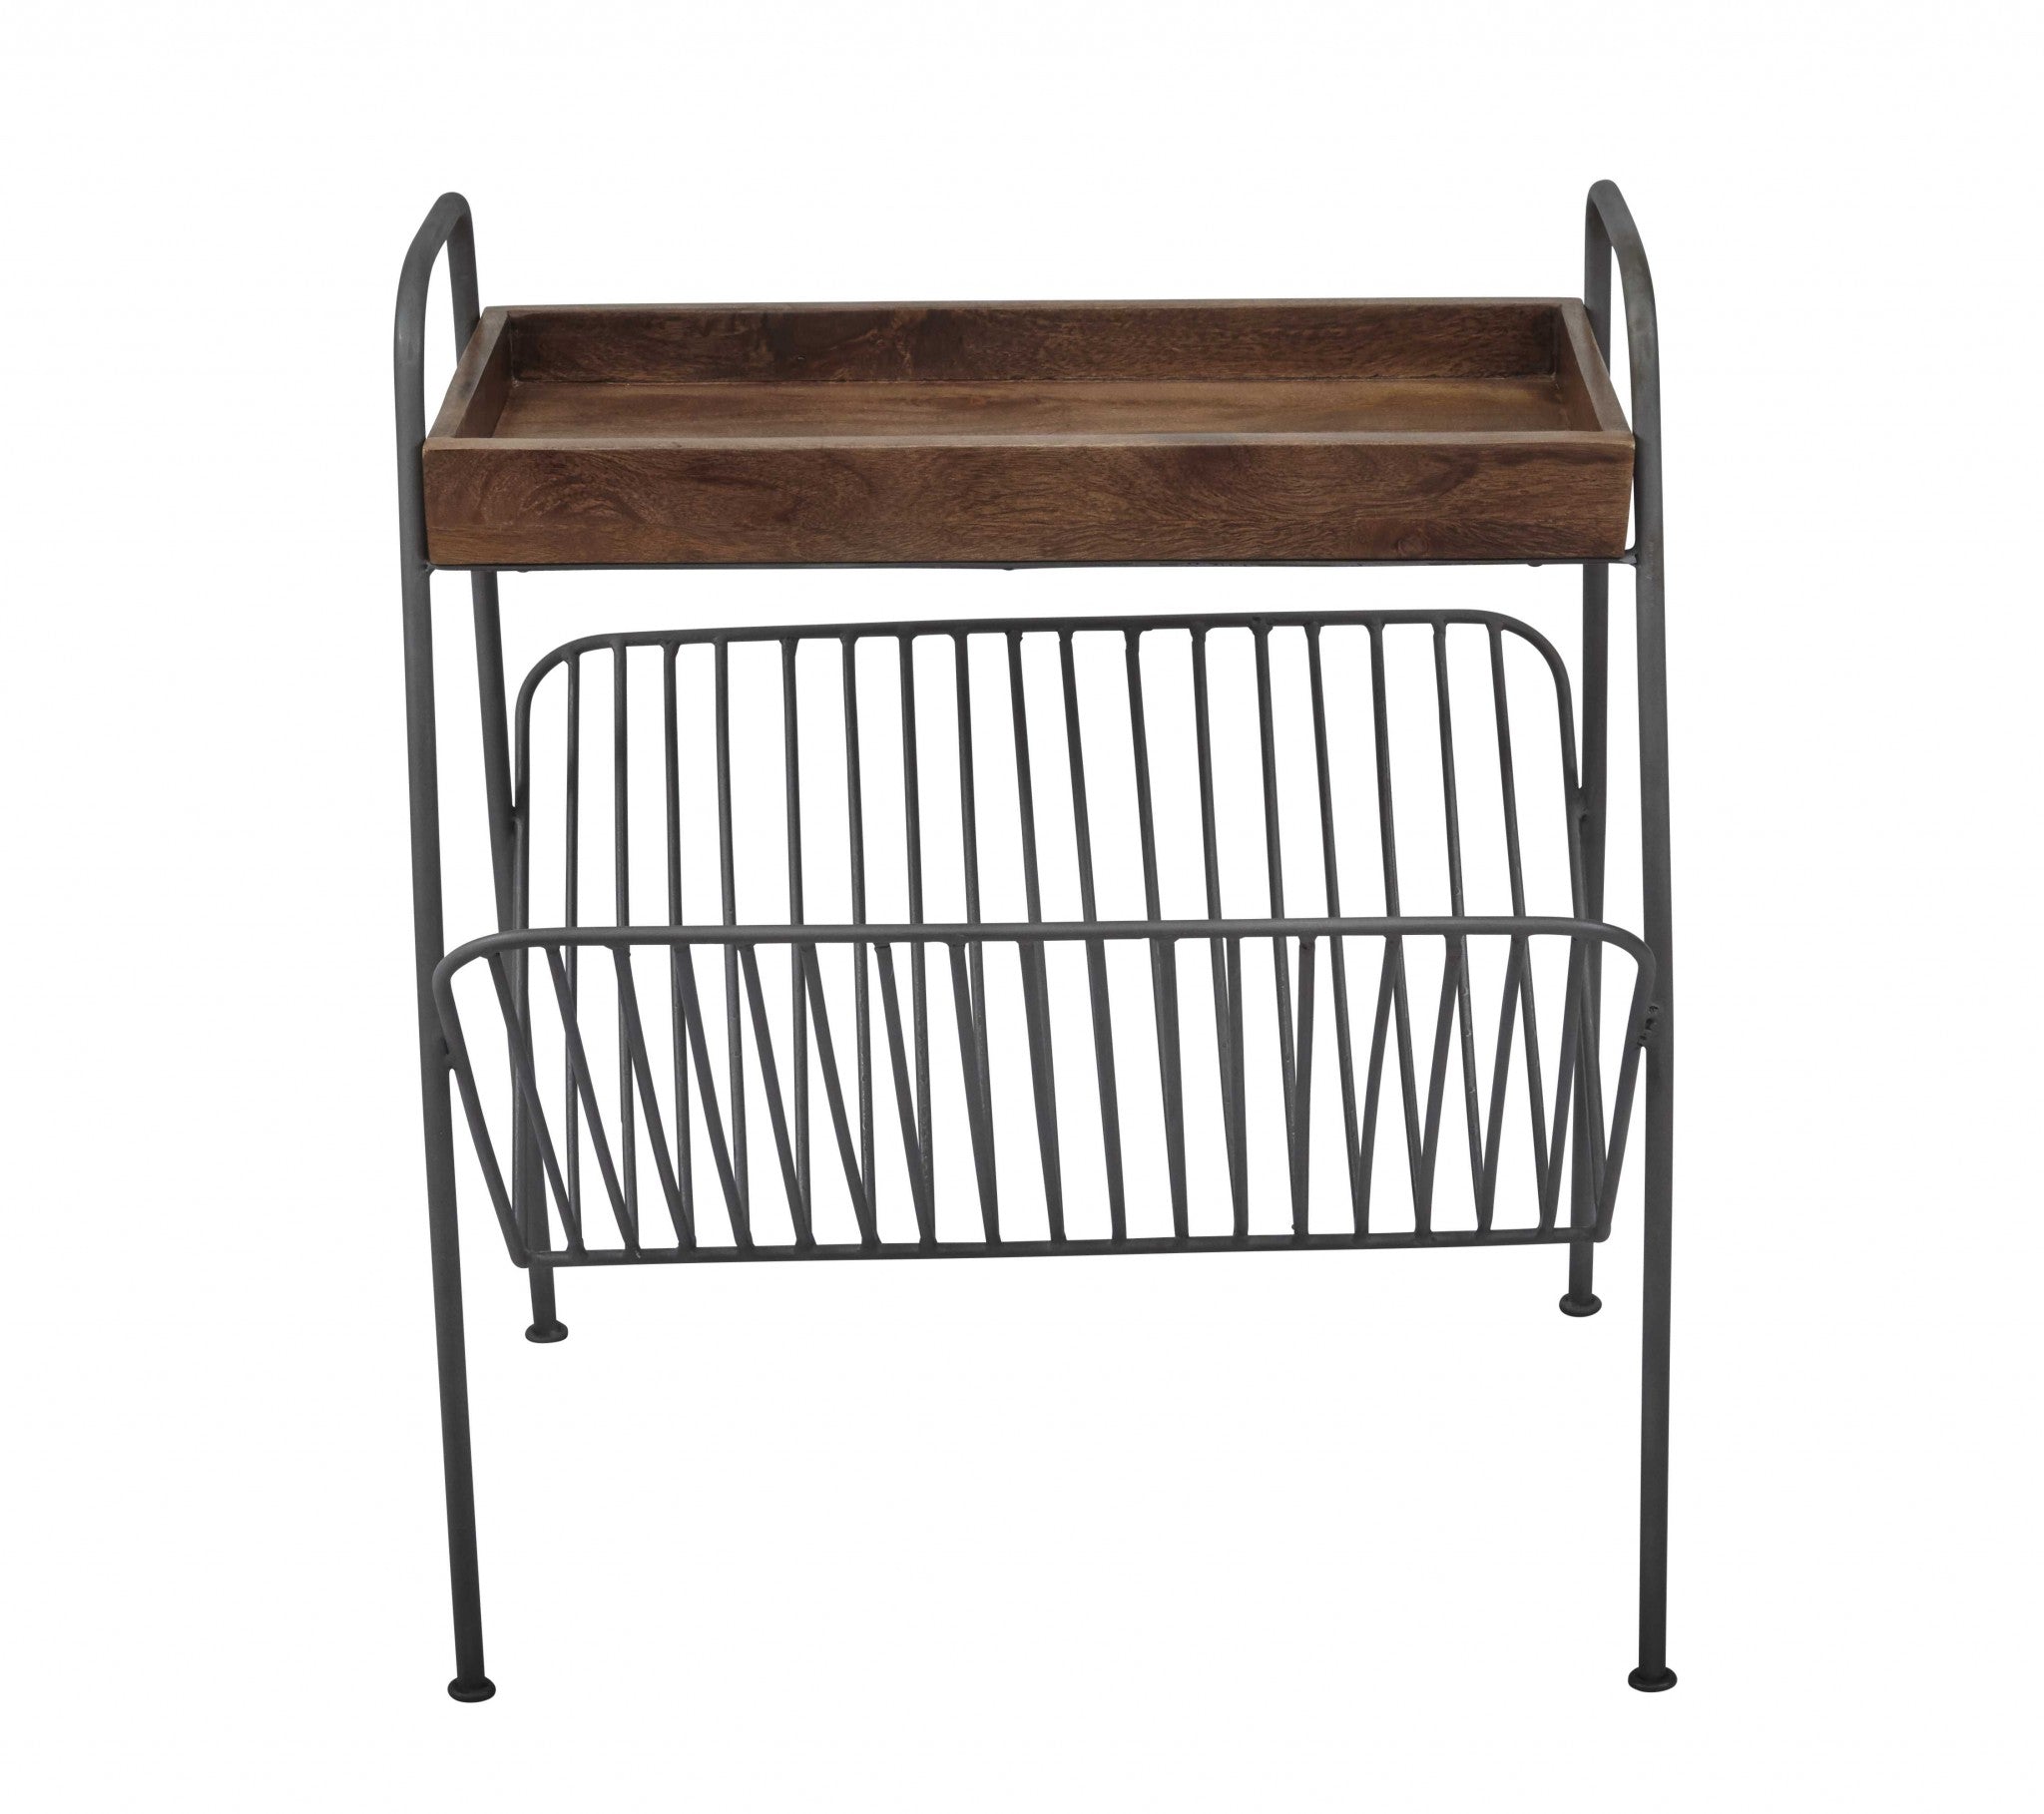 Wood And Metal Chairside Table With Magazine Rack, Brown And Black